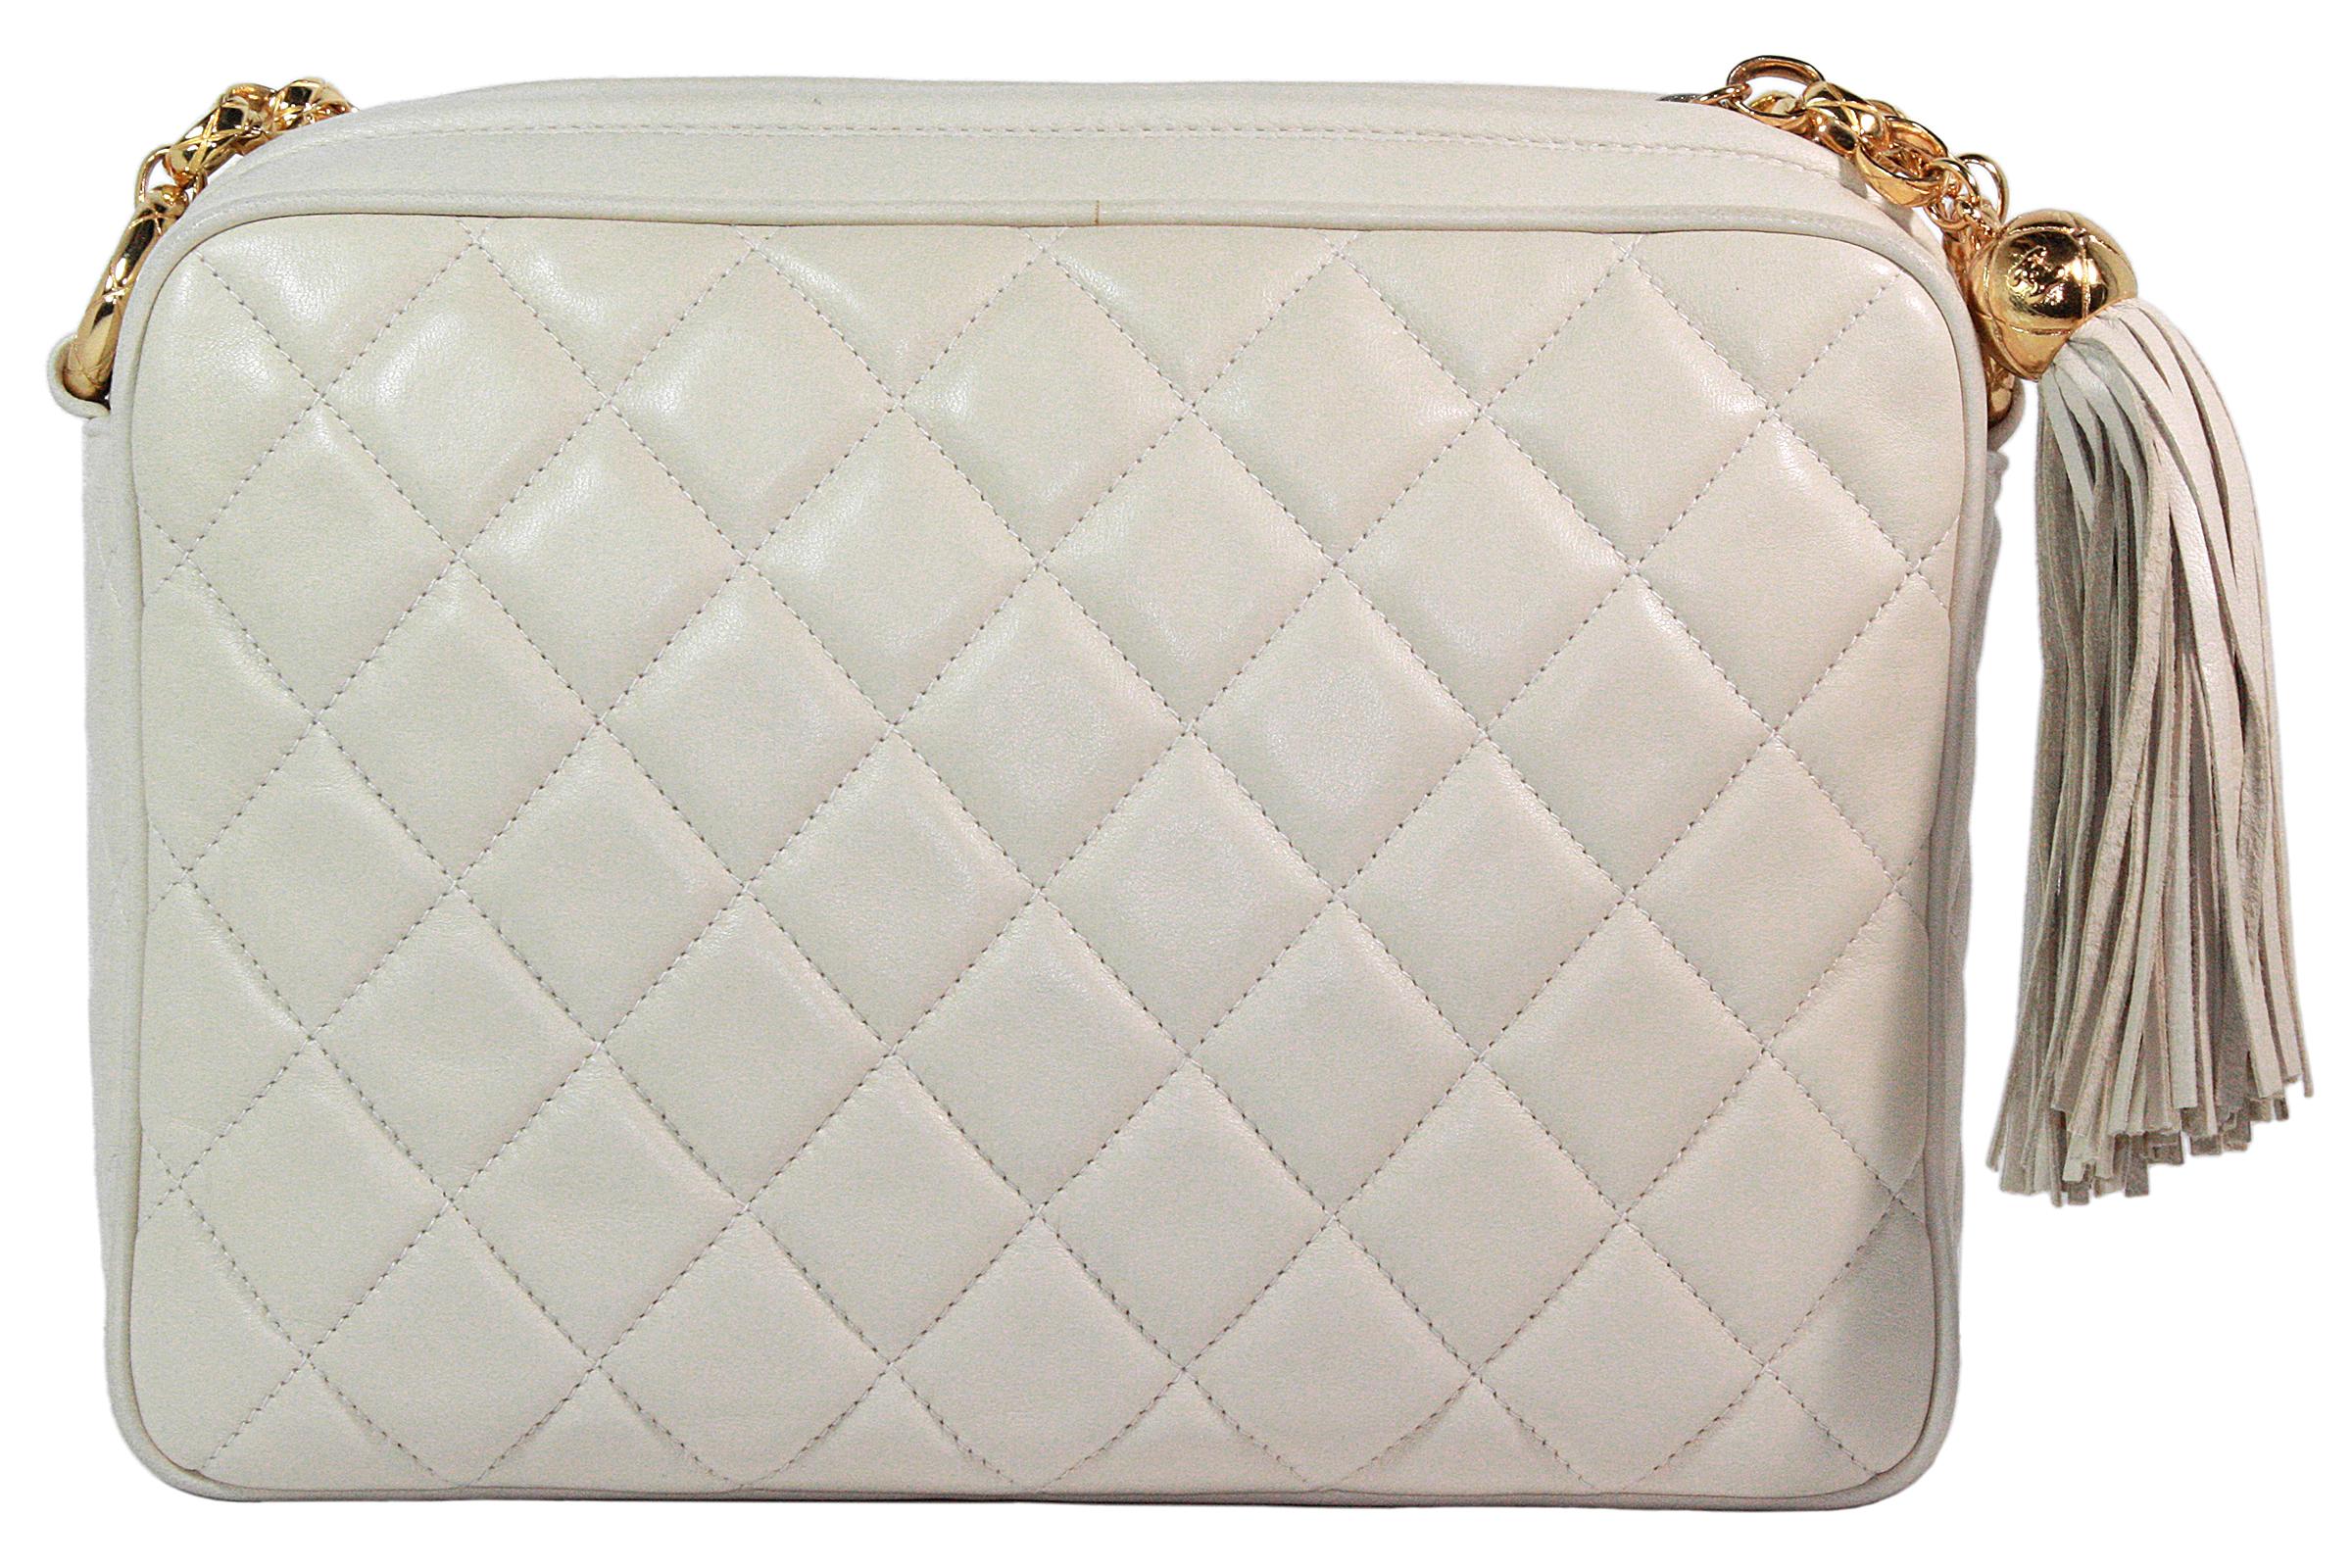 Chanel Cream Quilted Leather Crossbody Bag For Sale 2